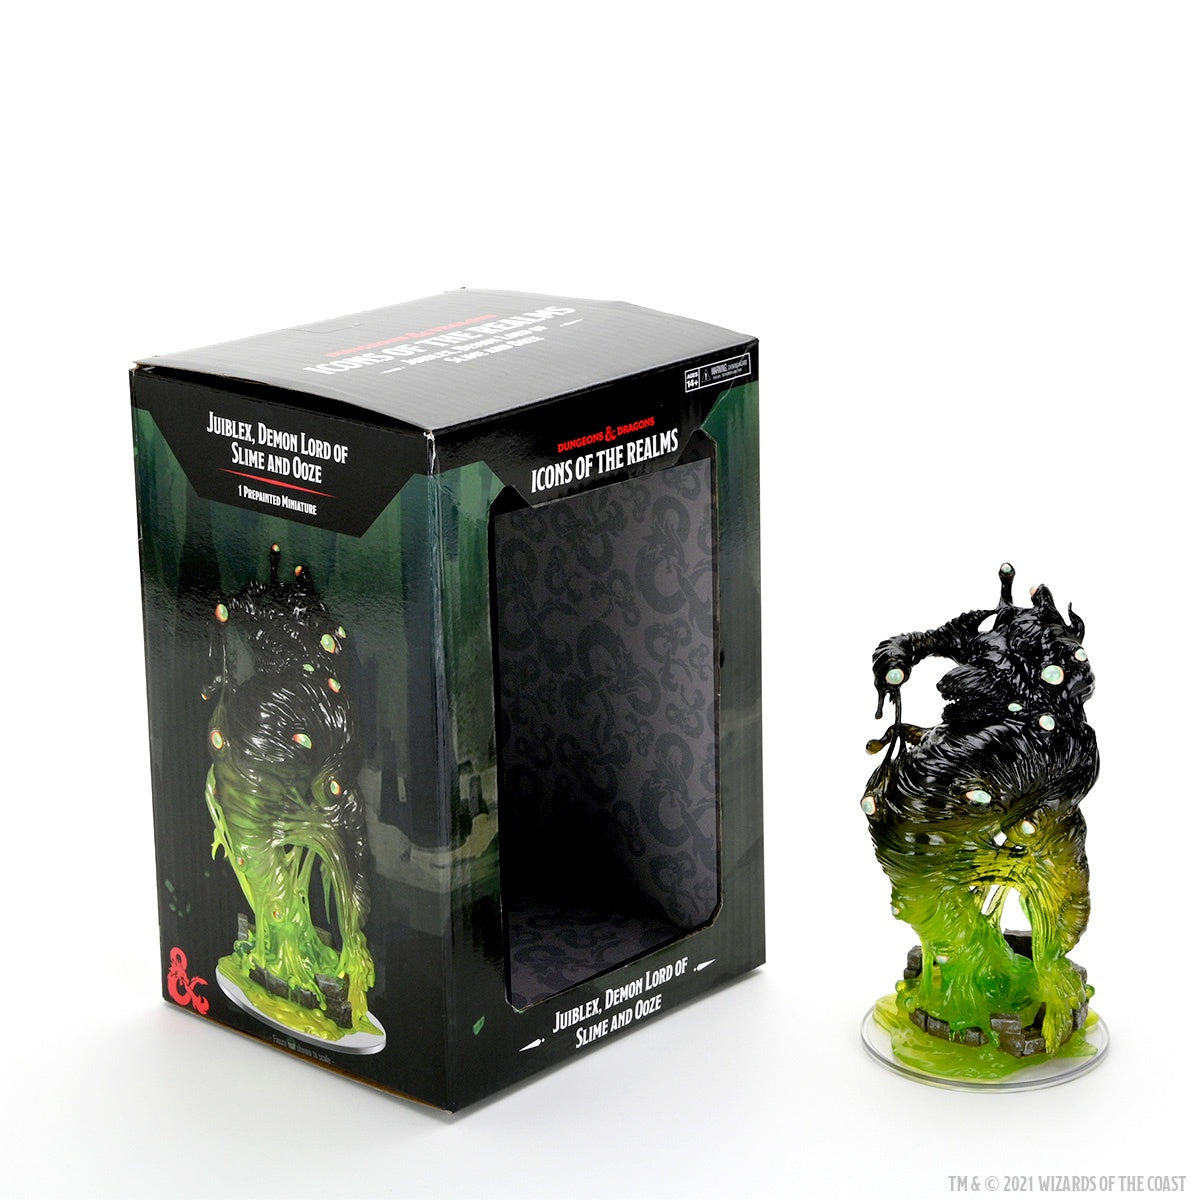 Dungeons and Dragons Fantasy Miniatures Icons of the Realms Juiblex Demon Lord of Slime and Ooze